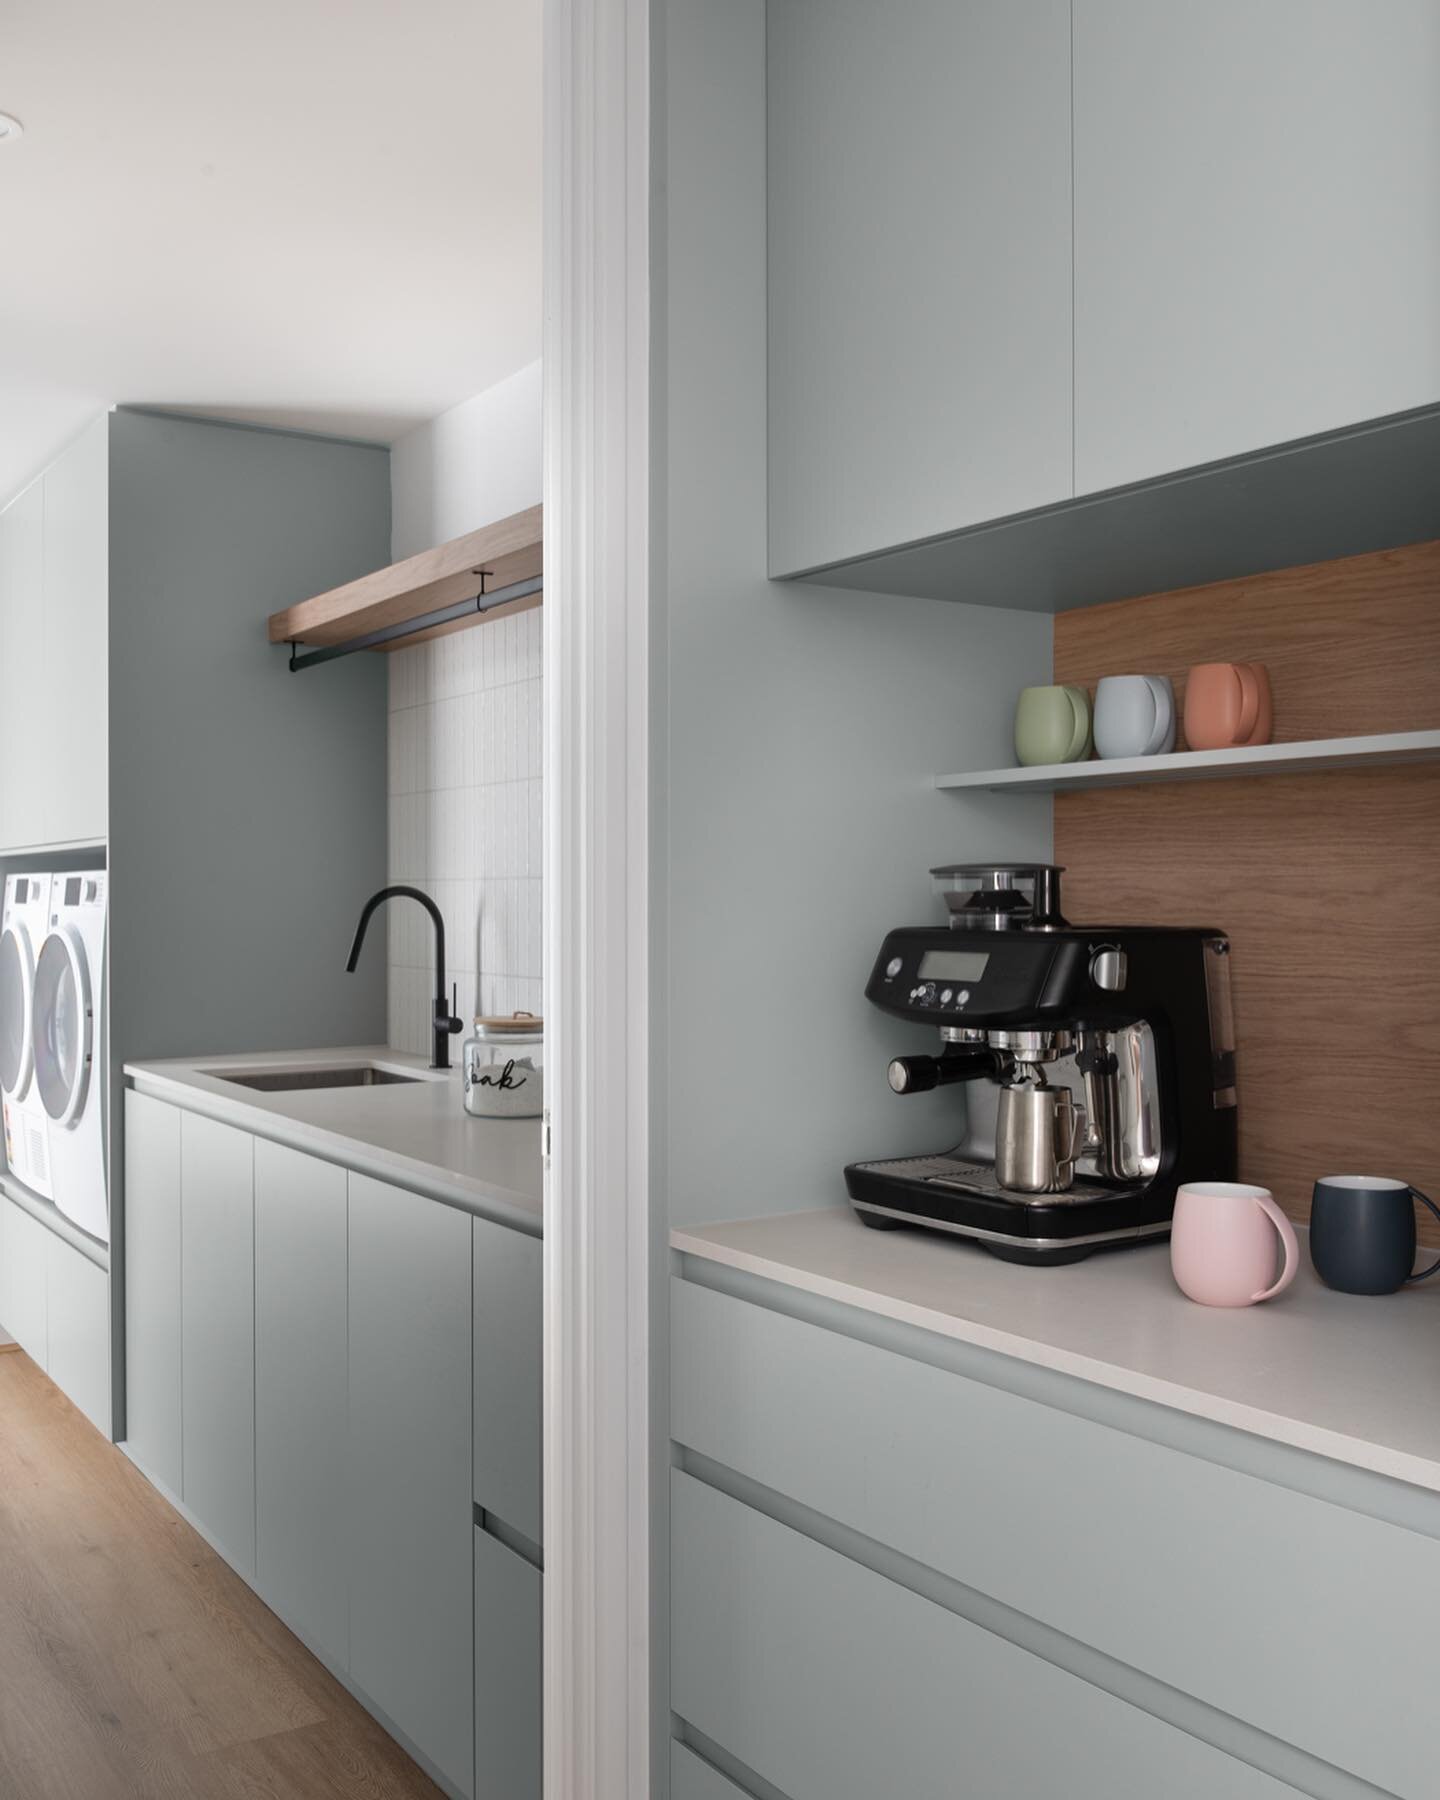 ➕FINALISTS➕ We&rsquo;re pretty stoked to be named as finalists for our Swanbourne laundry renovation, in the @hartandco.appliances &lsquo;Kitchen and Laundry Design Awards&rsquo;. Especially as the quality is so high! 

For this project I engaged the